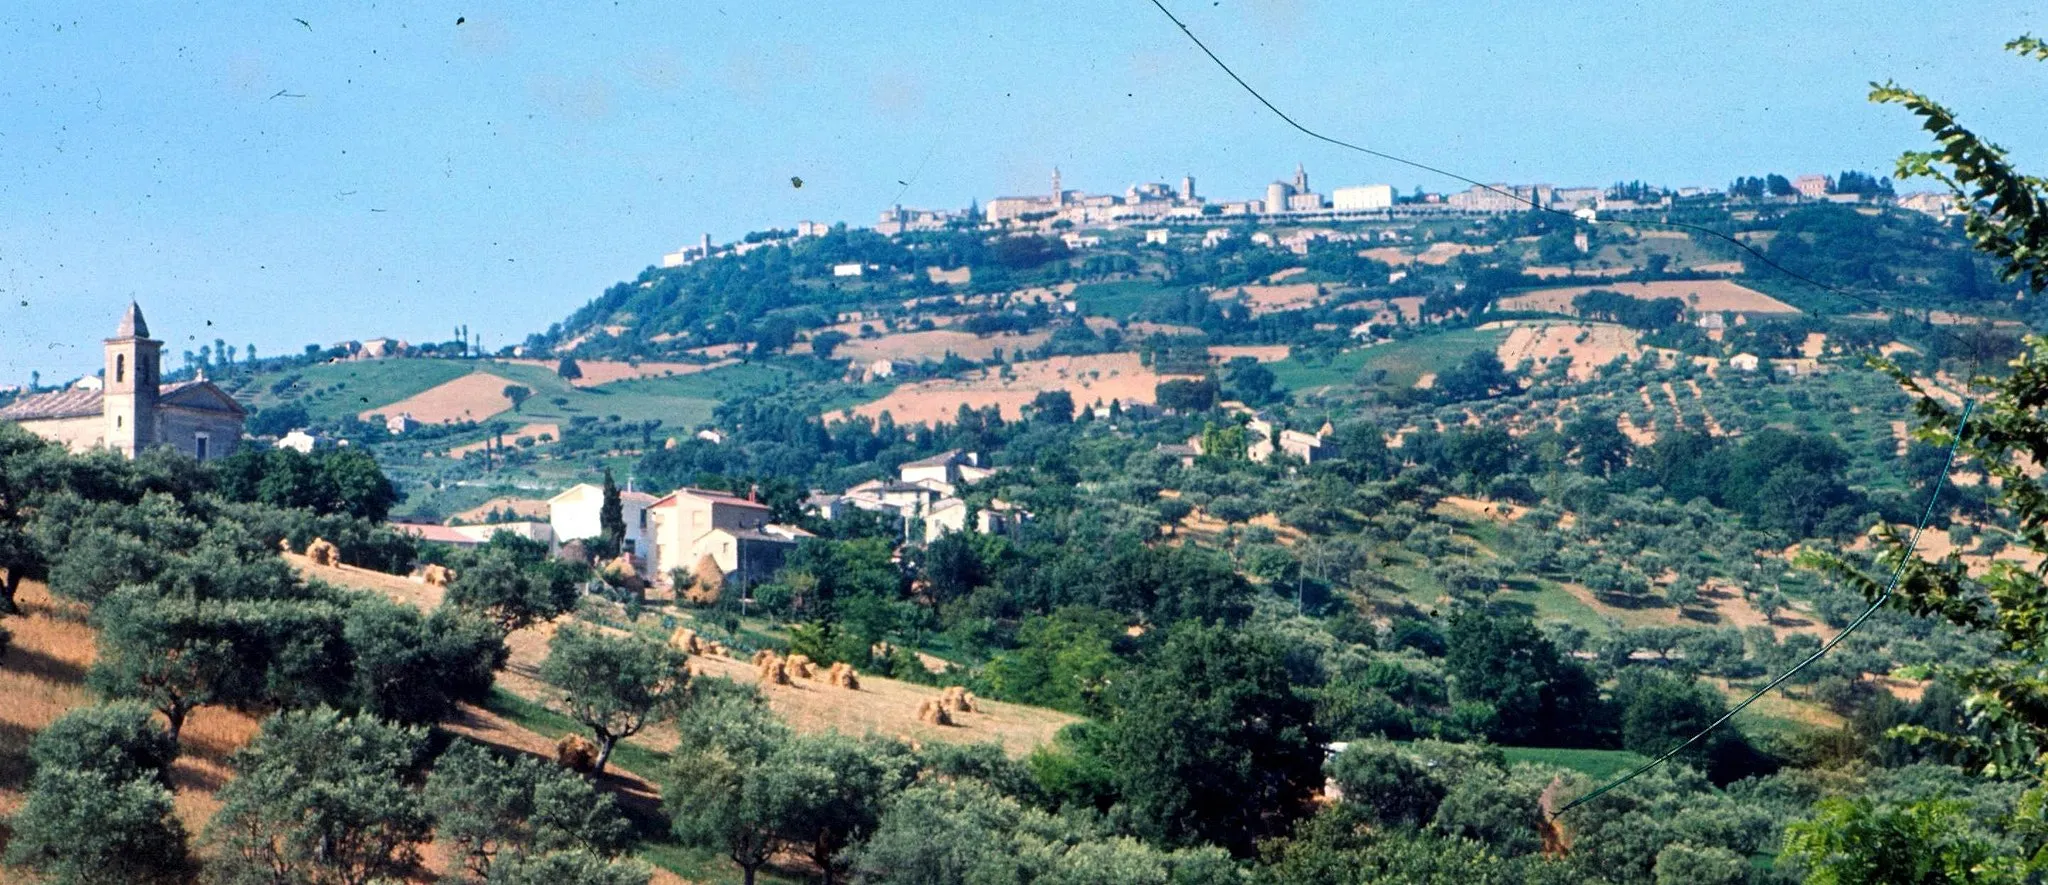 Photo showing: Celso Mosca, Cingoli panorama